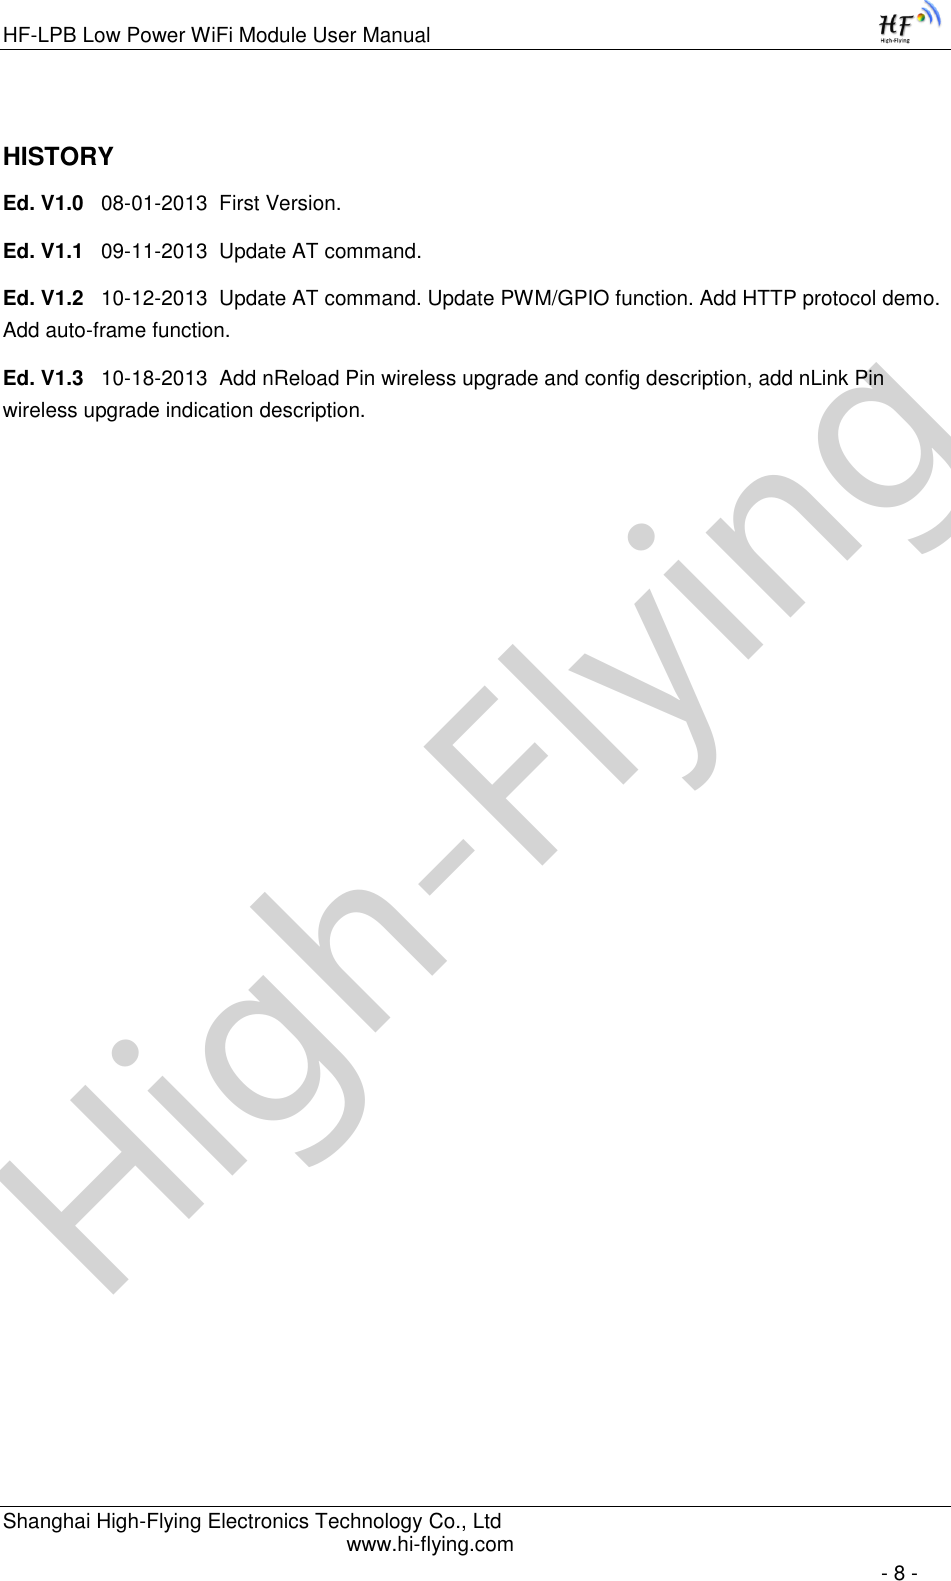 High-FlyingHF-LPB Low Power WiFi Module User Manual Shanghai High-Flying Electronics Technology Co., Ltd www.hi-flying.com   - 8 - HISTORY Ed. V1.0   08-01-2013  First Version. Ed. V1.1   09-11-2013  Update AT command. Ed. V1.2   10-12-2013  Update AT command. Update PWM/GPIO function. Add HTTP protocol demo. Add auto-frame function. Ed. V1.3   10-18-2013  Add nReload Pin wireless upgrade and config description, add nLink Pin wireless upgrade indication description.             